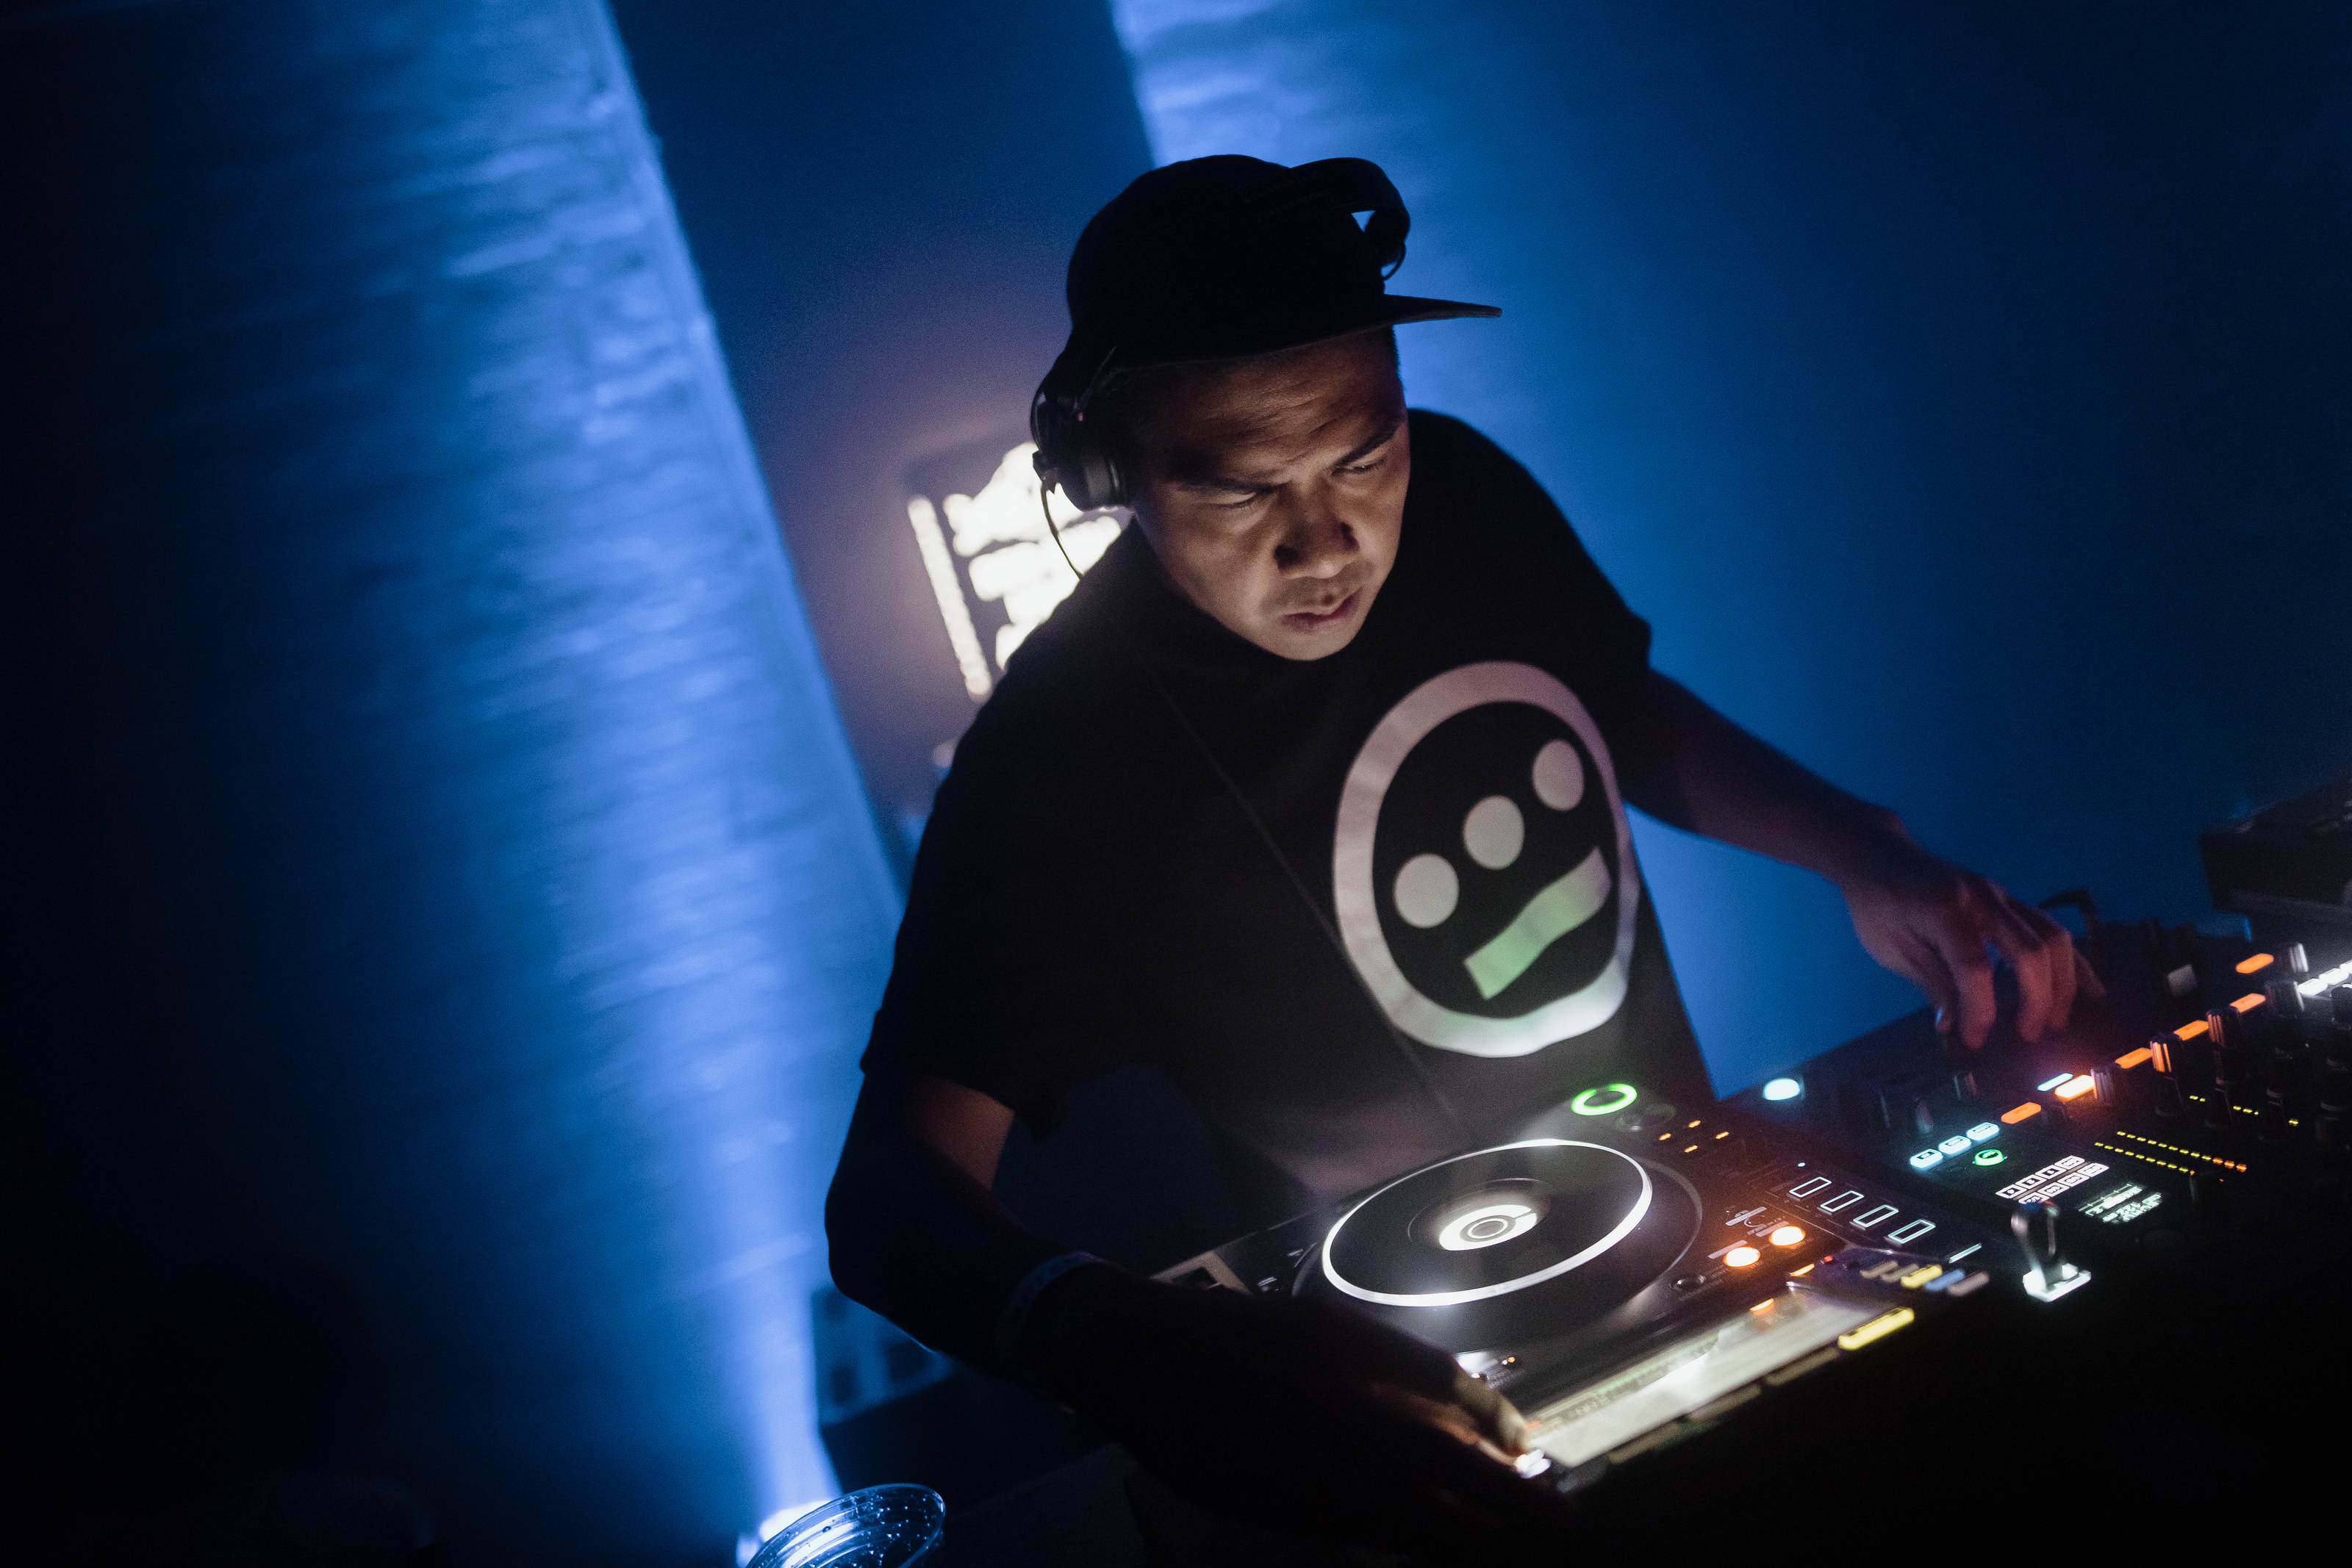 Mike Servito Red Bull Content Pool photo credit Karel Chladek